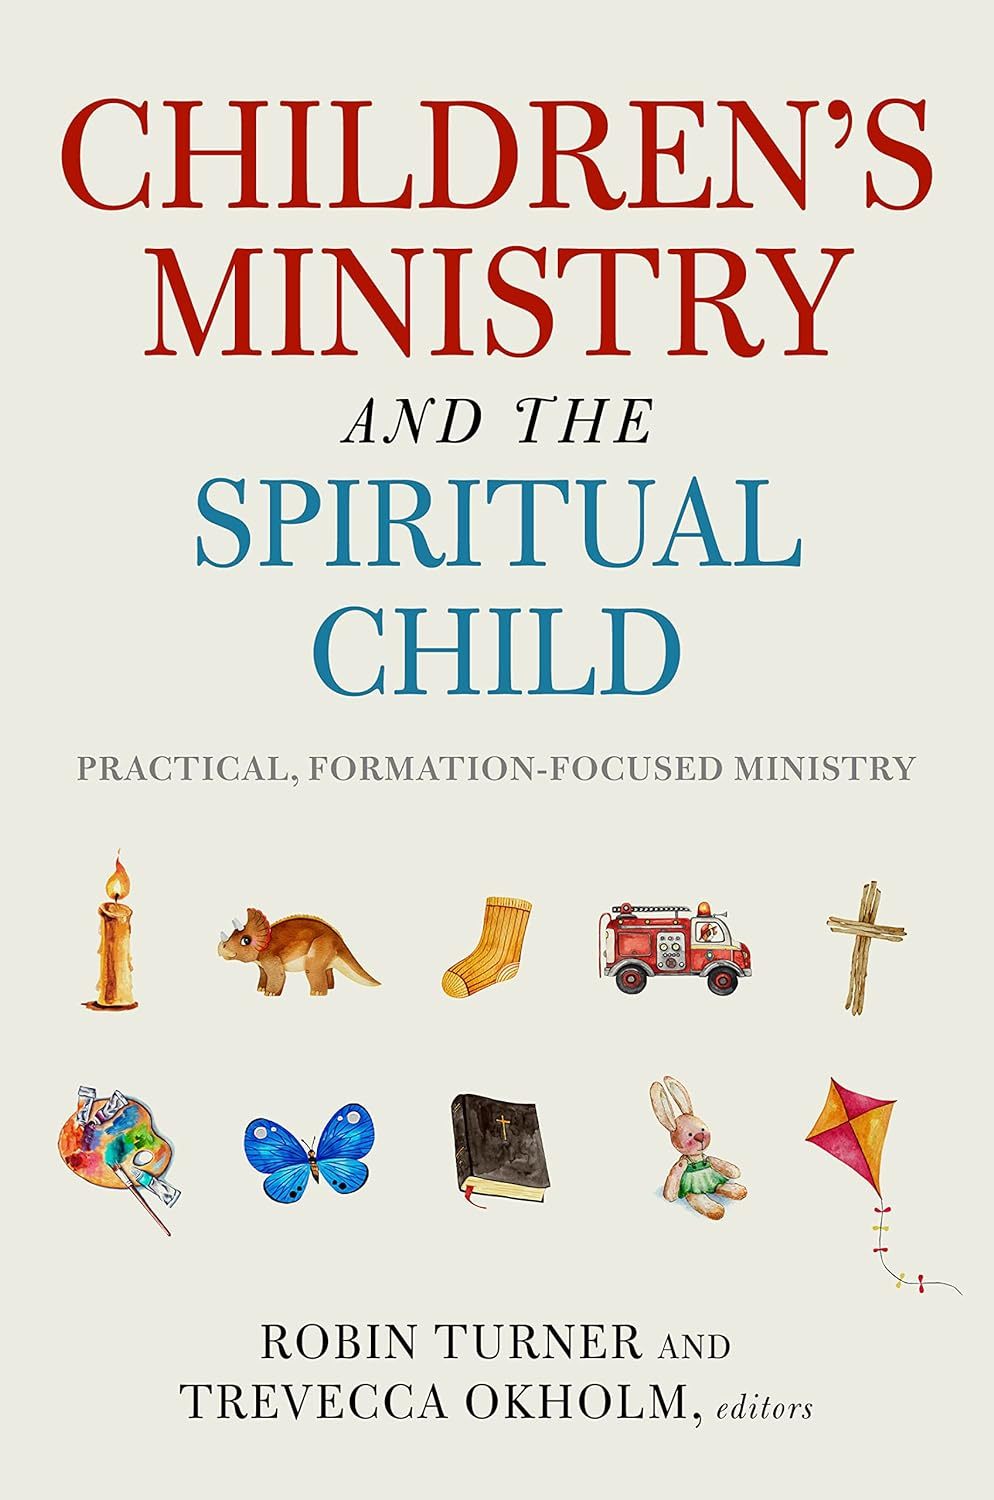 Children's ministry and the spiritual child.